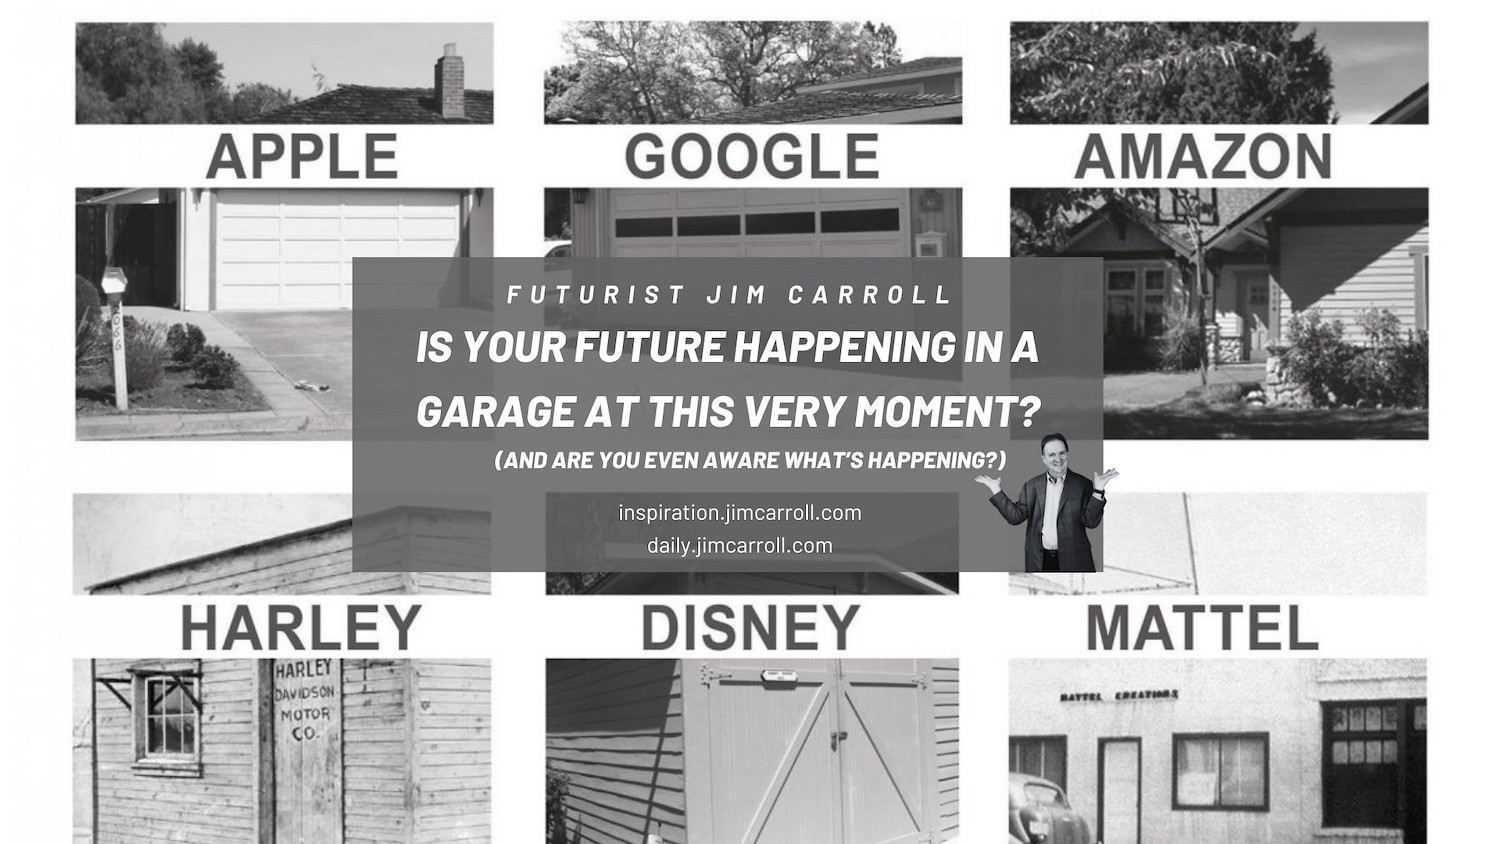 GarageIn"Is your future happening in a garage at this very moment? (And are you even aware what's happening?)" - Futurist Jim Carroll